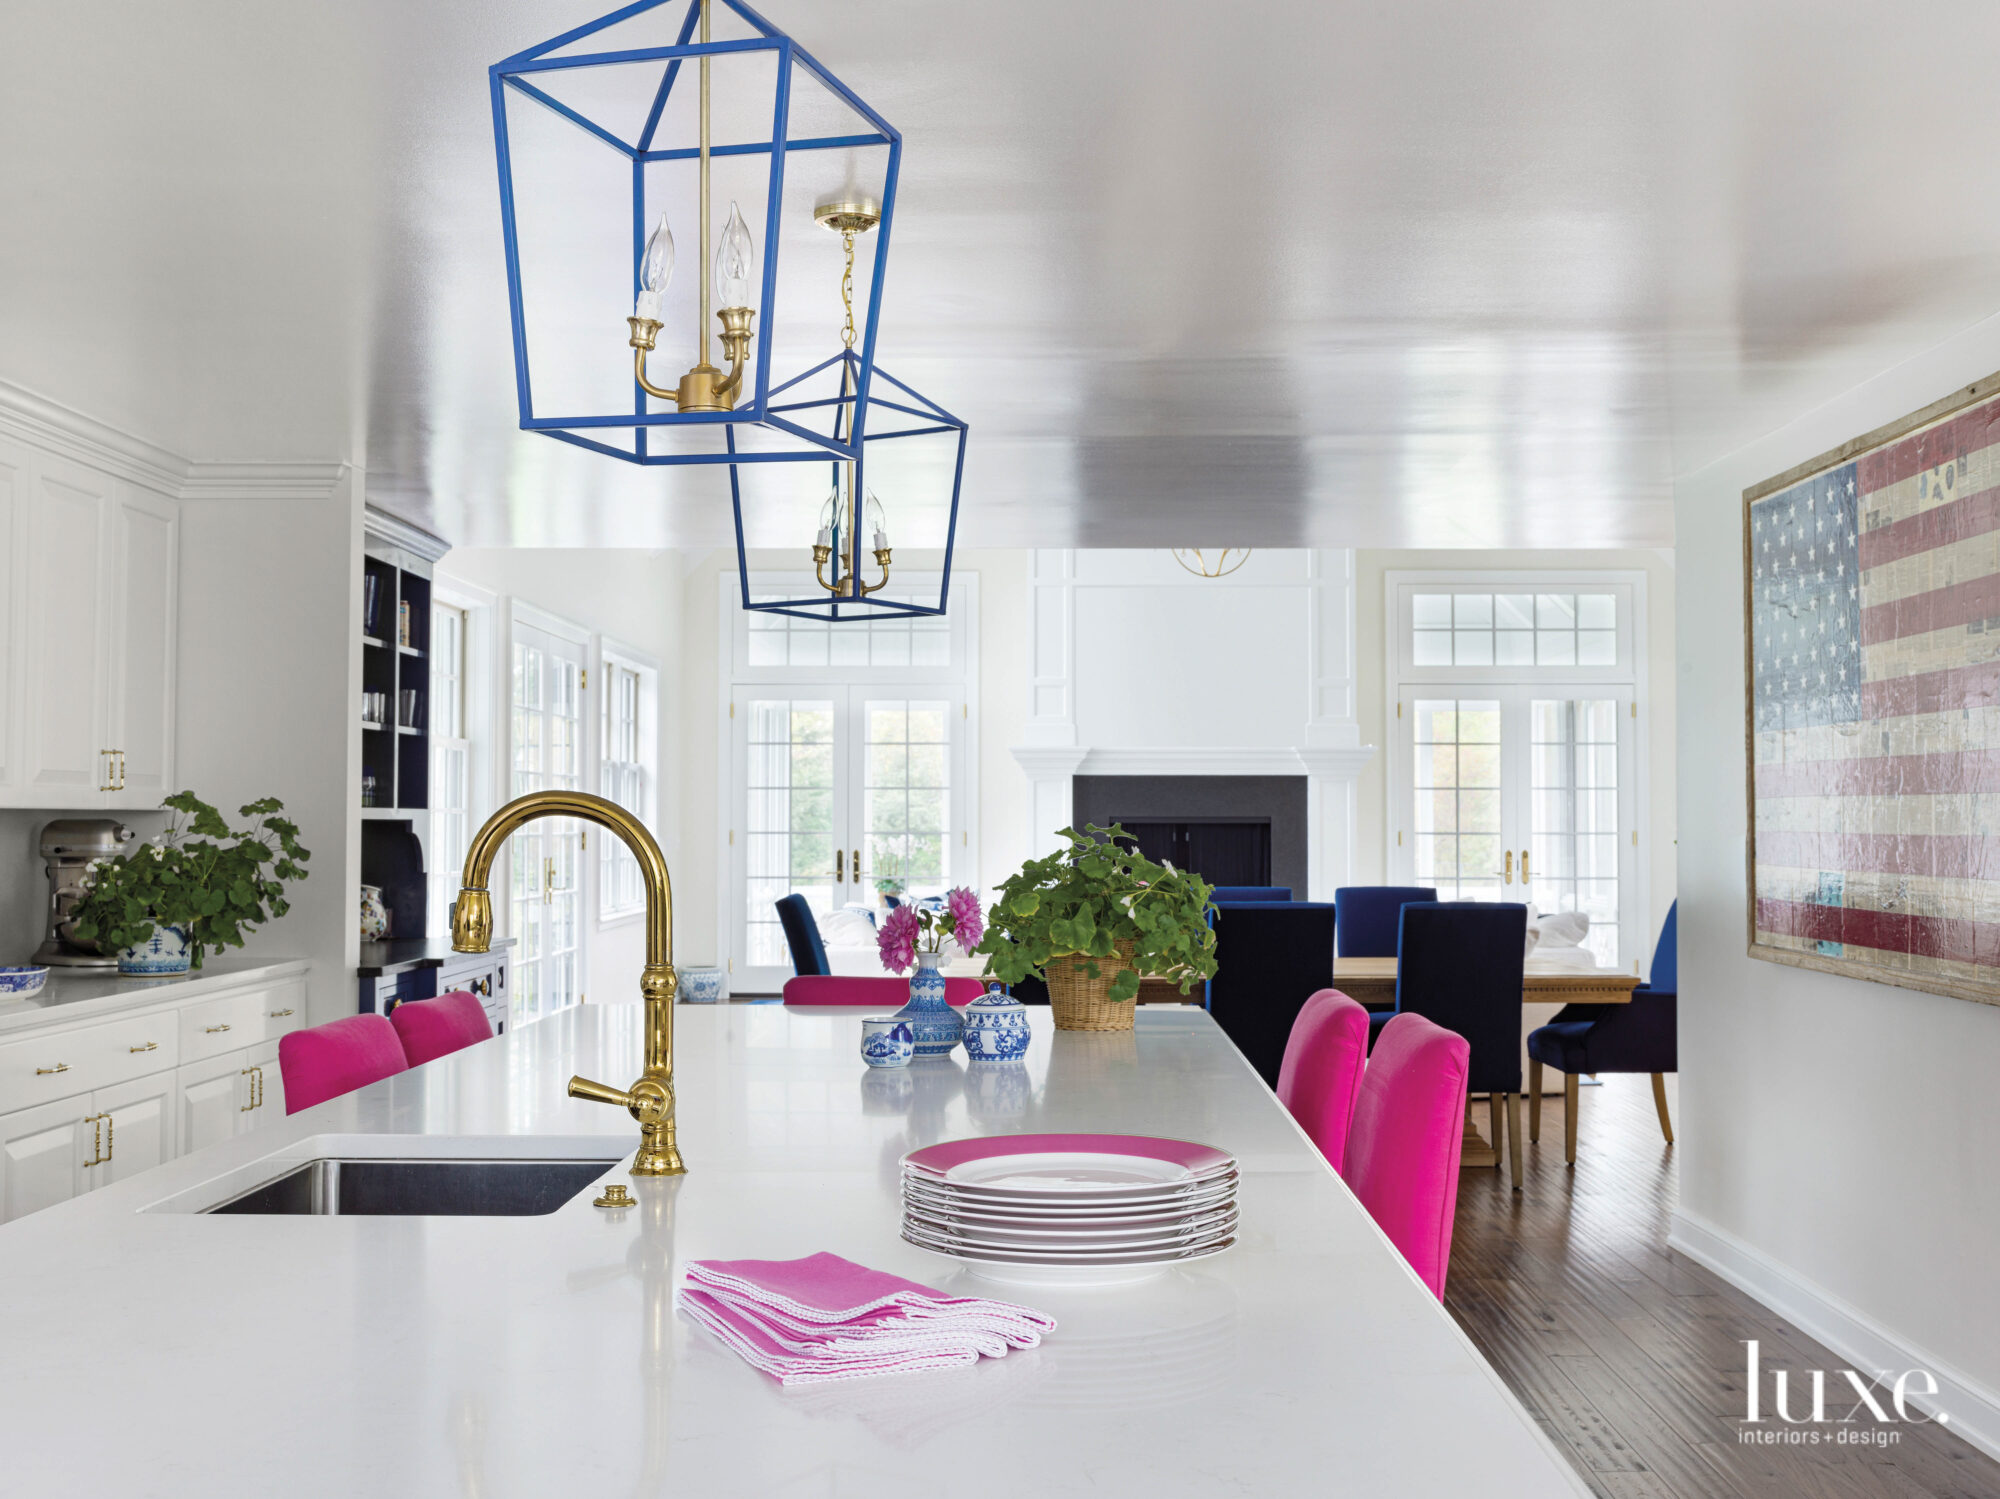 The kitchen has fuchsia counter stools, and blue-and-gold accents throughout.